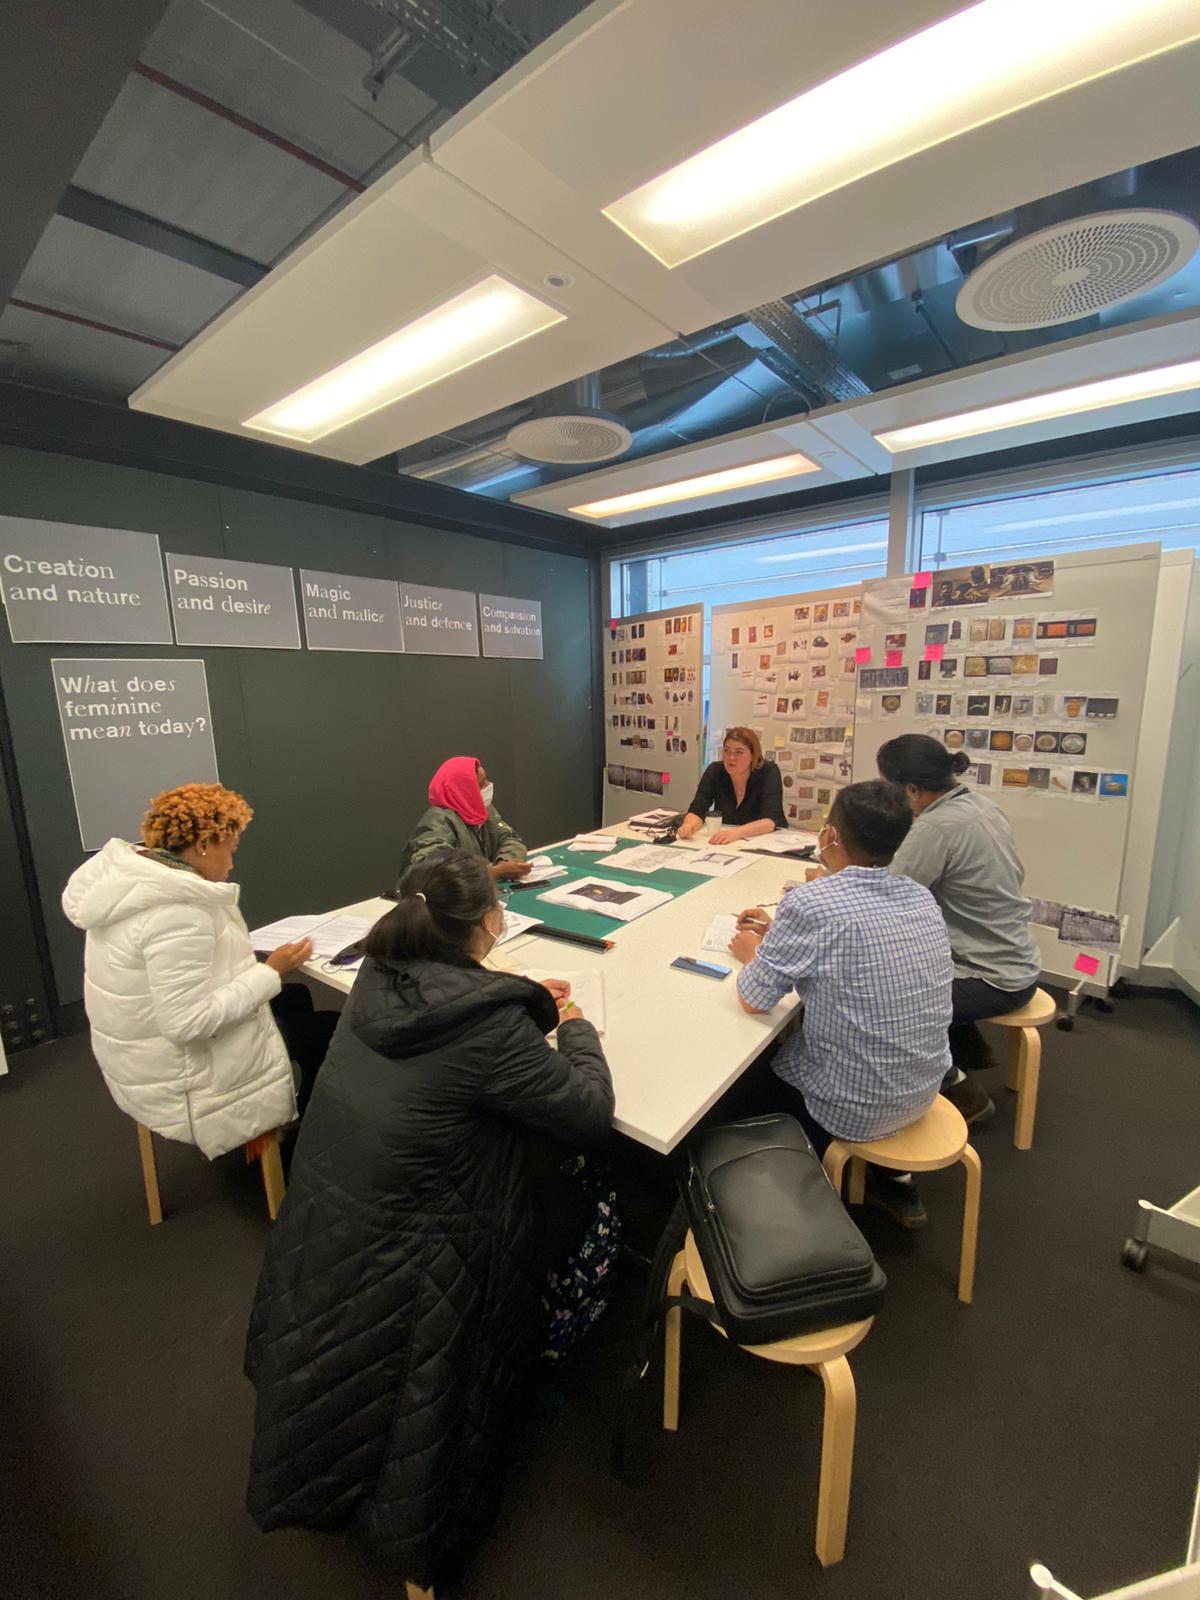 Six people sit around a table surrounded by whiteboards covered in notes and images